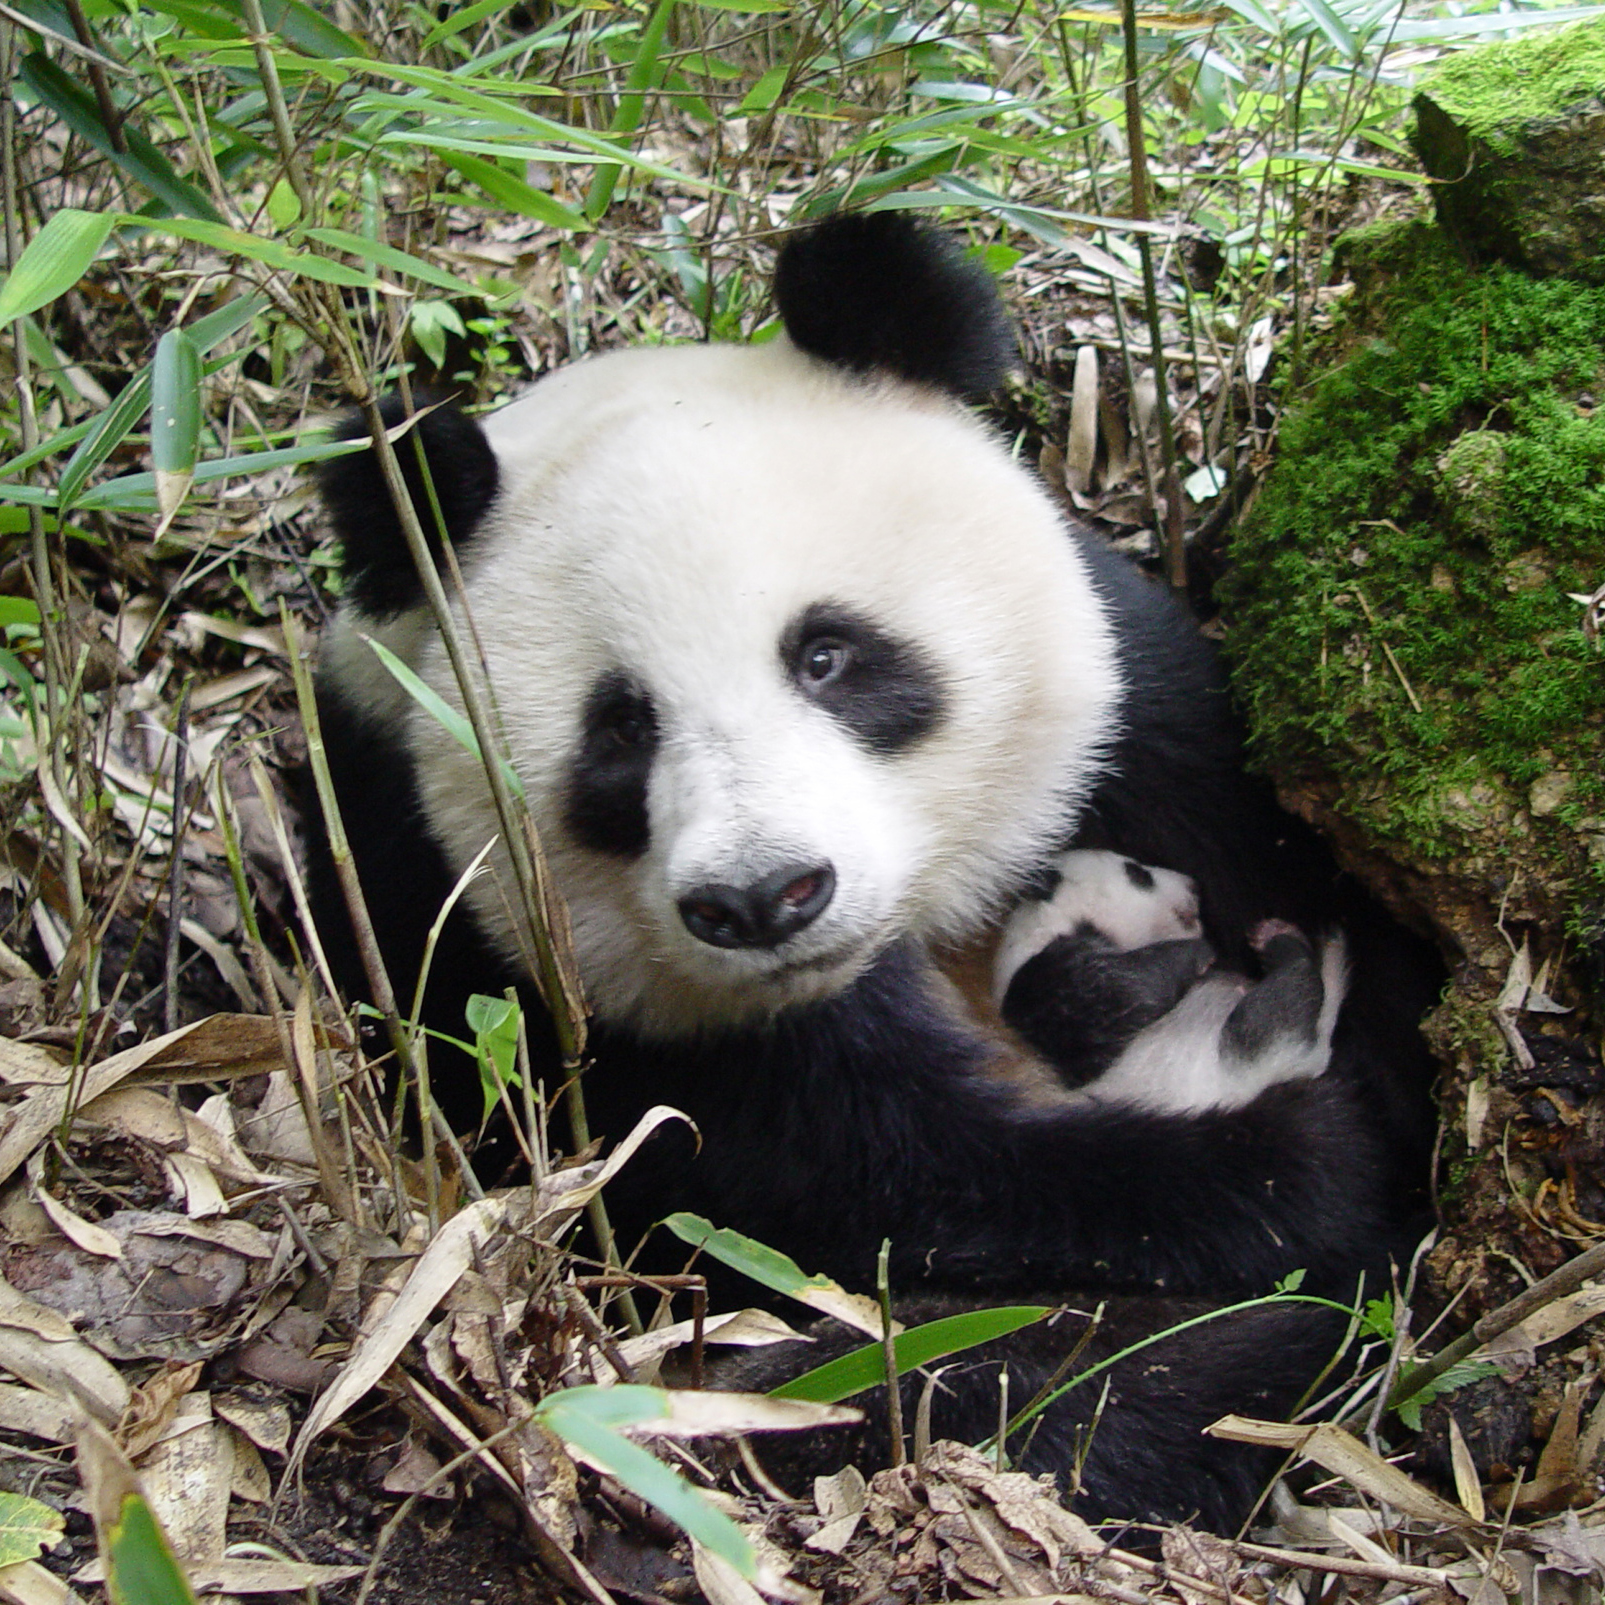 A giant panda with a young cub in Shaanxi province, China.